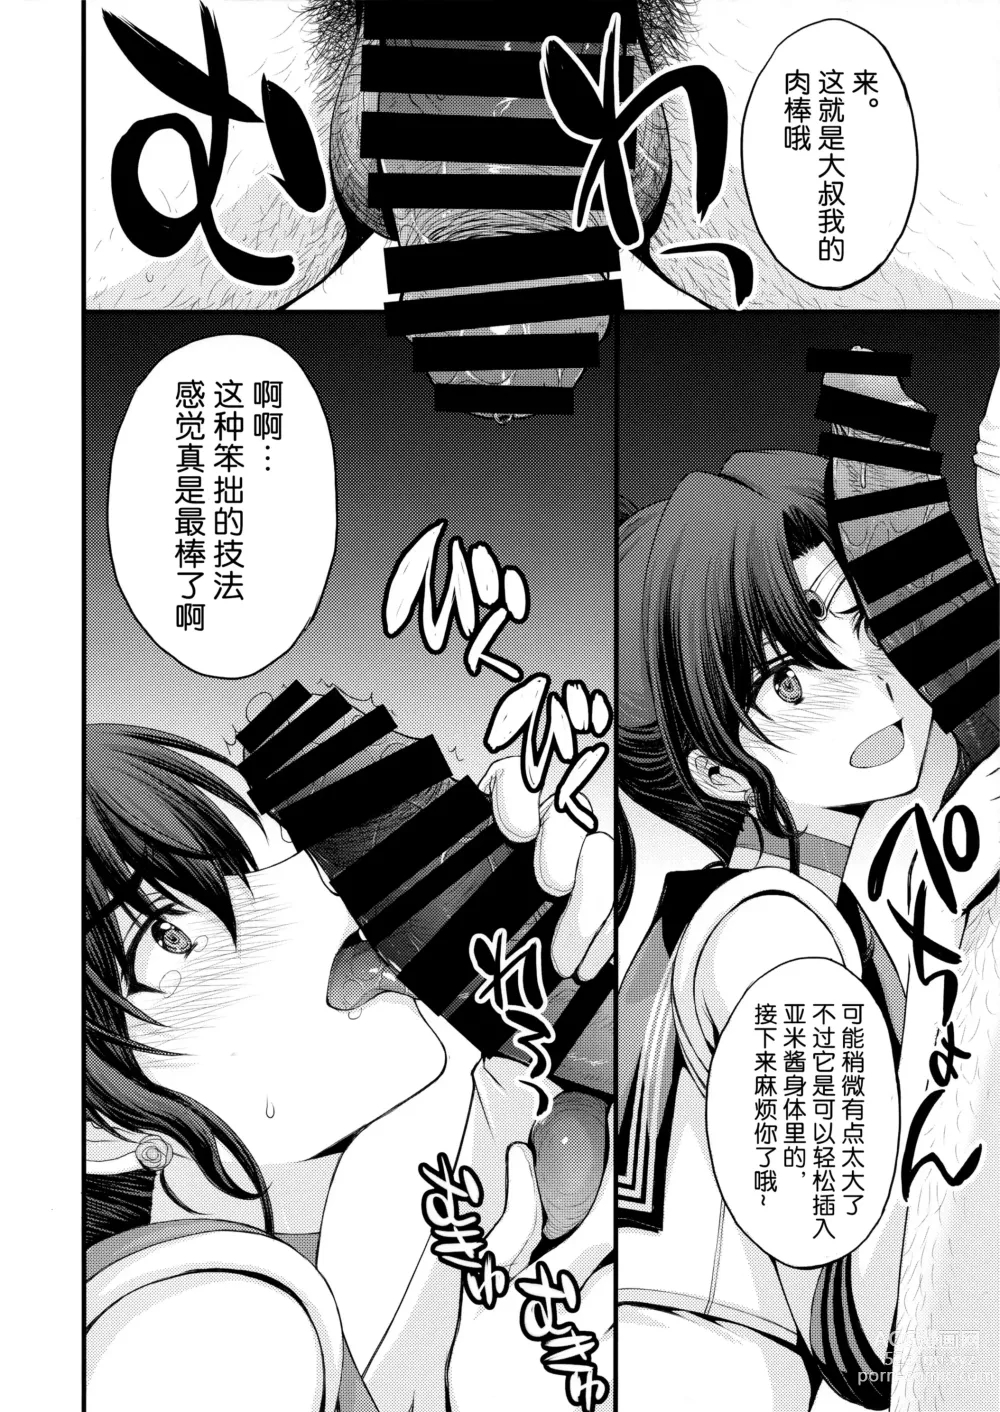 Page 15 of doujinshi 败给肉棒的真琴酱with亚米酱